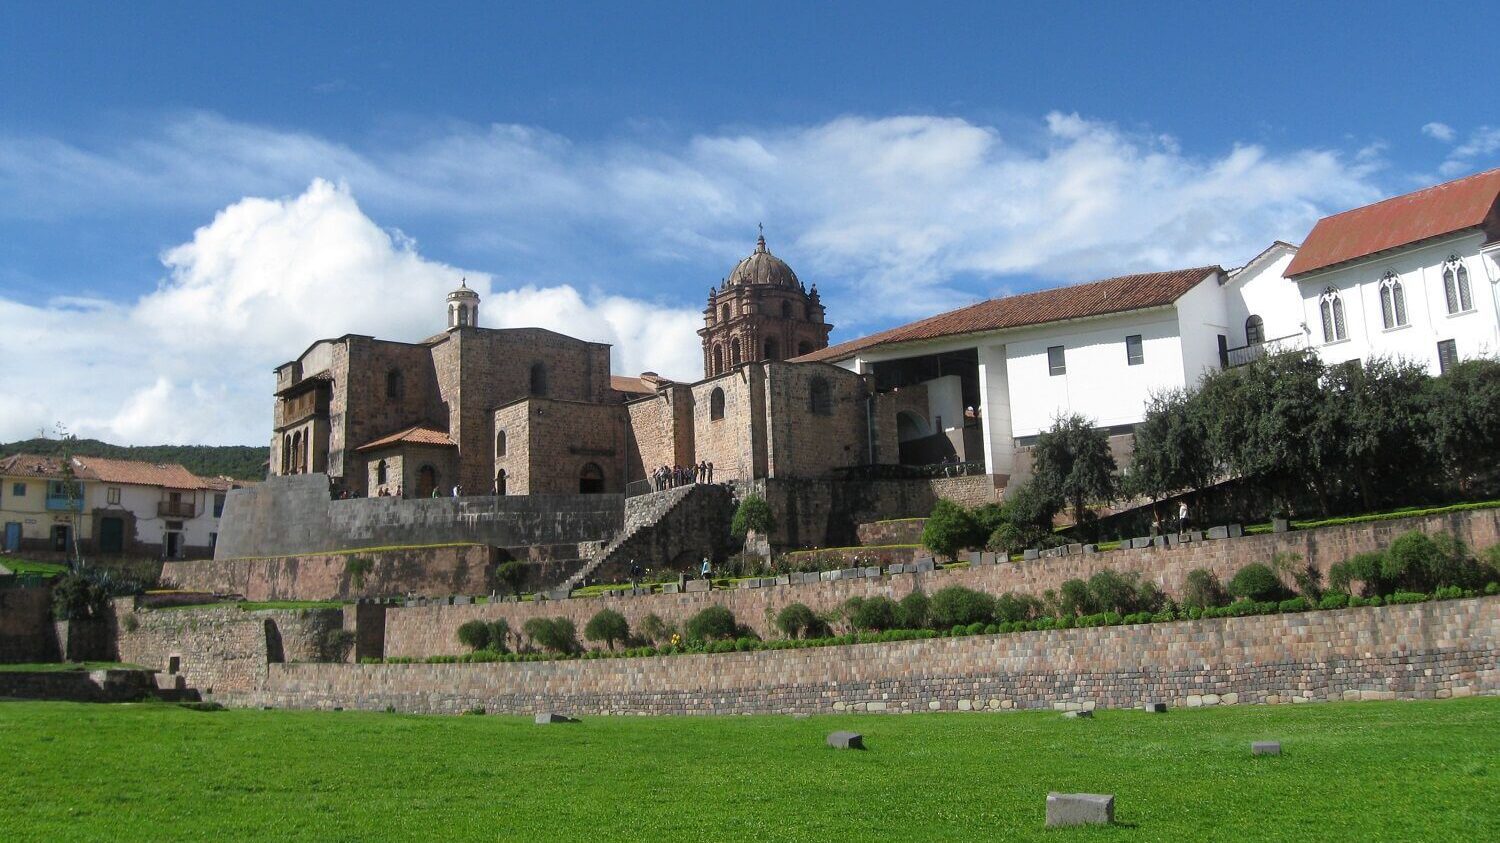 Qorikancha, Quricancha or Coricancha are the Quechua names for the ancient Sun Temple in Cusco. On its foundations you now find the Convento Santo Domingo, built by the Spaniards. Visit Cusco alternatively with RESPONSible Travel Peru!